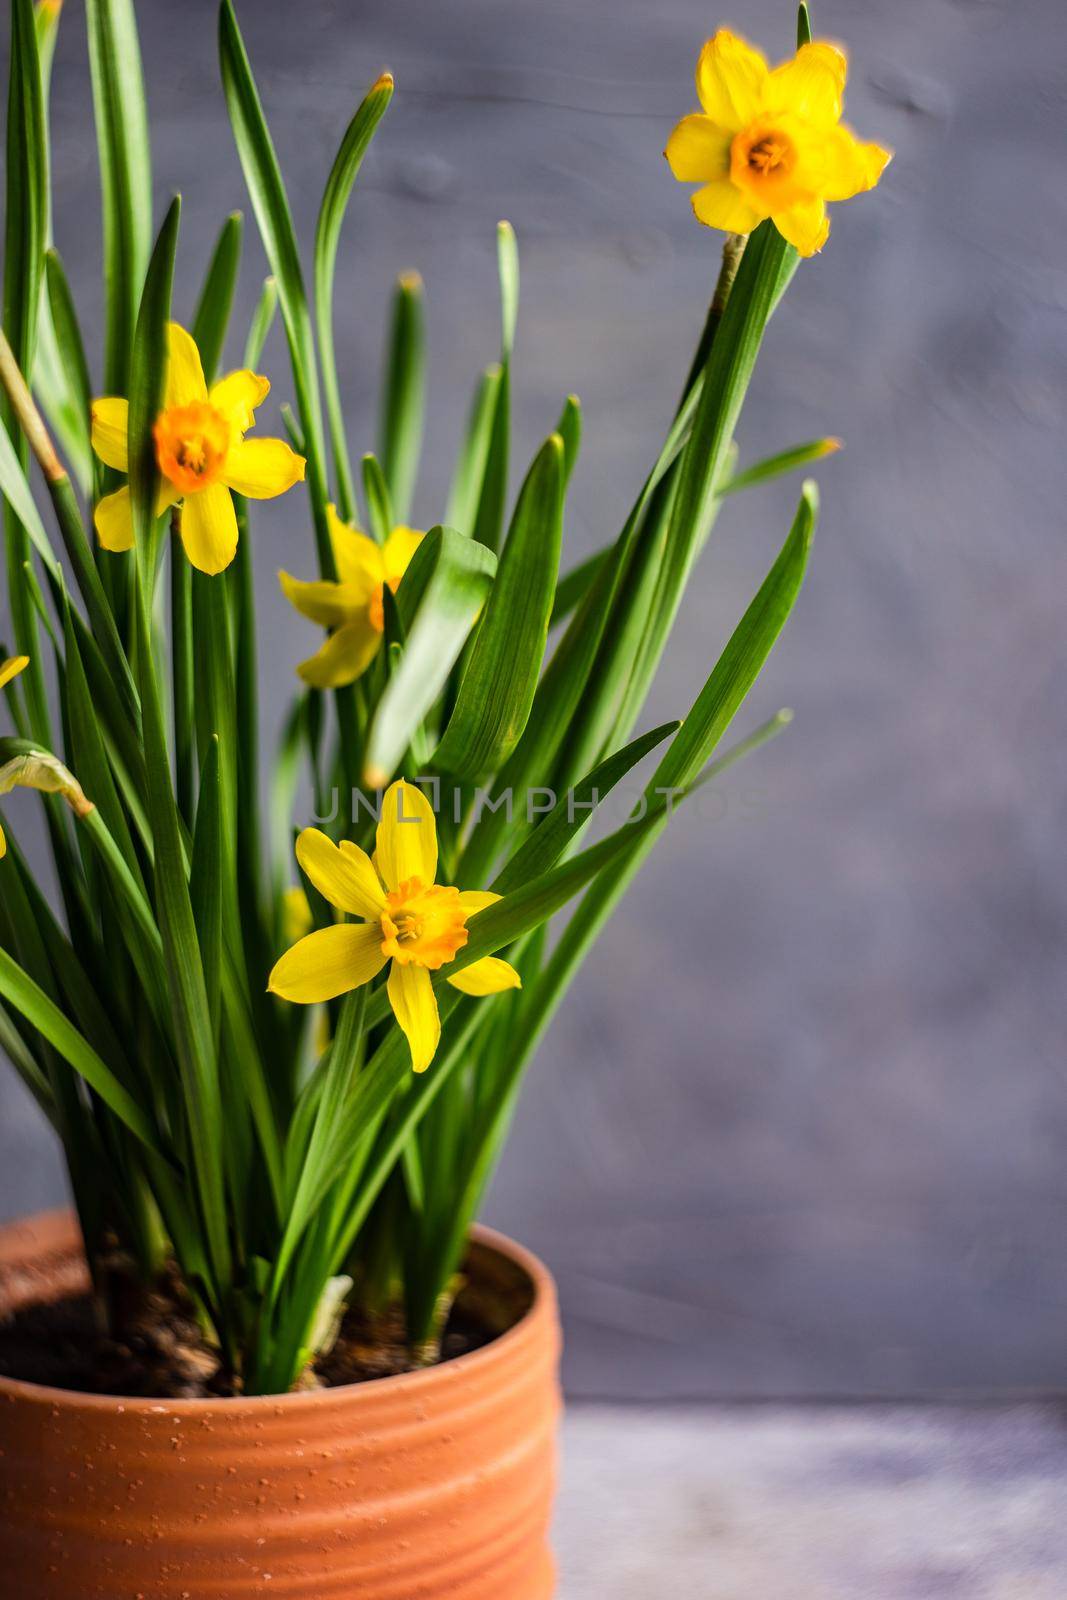 Seasonal home decor with flower pot of daffodils by Elet